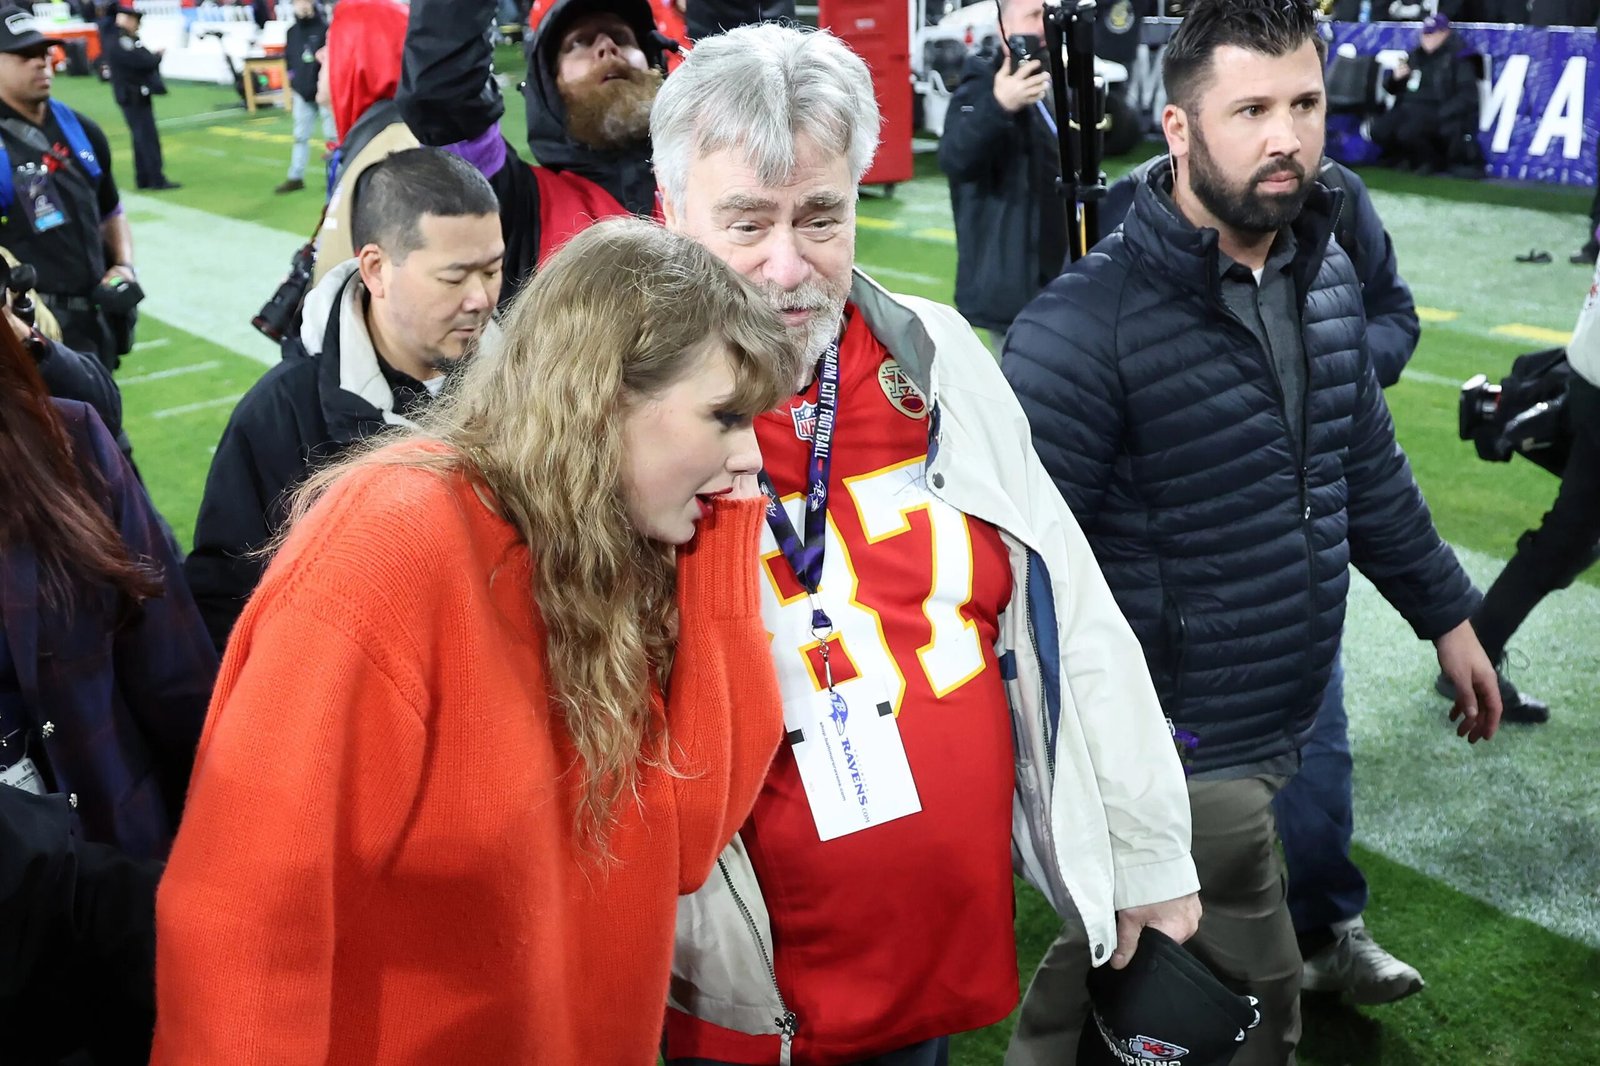 Taylor Swift calls Ed Kelce ‘dad’ as she looks for Travis after Chiefs vs. Ravens game "She's now part of the family"